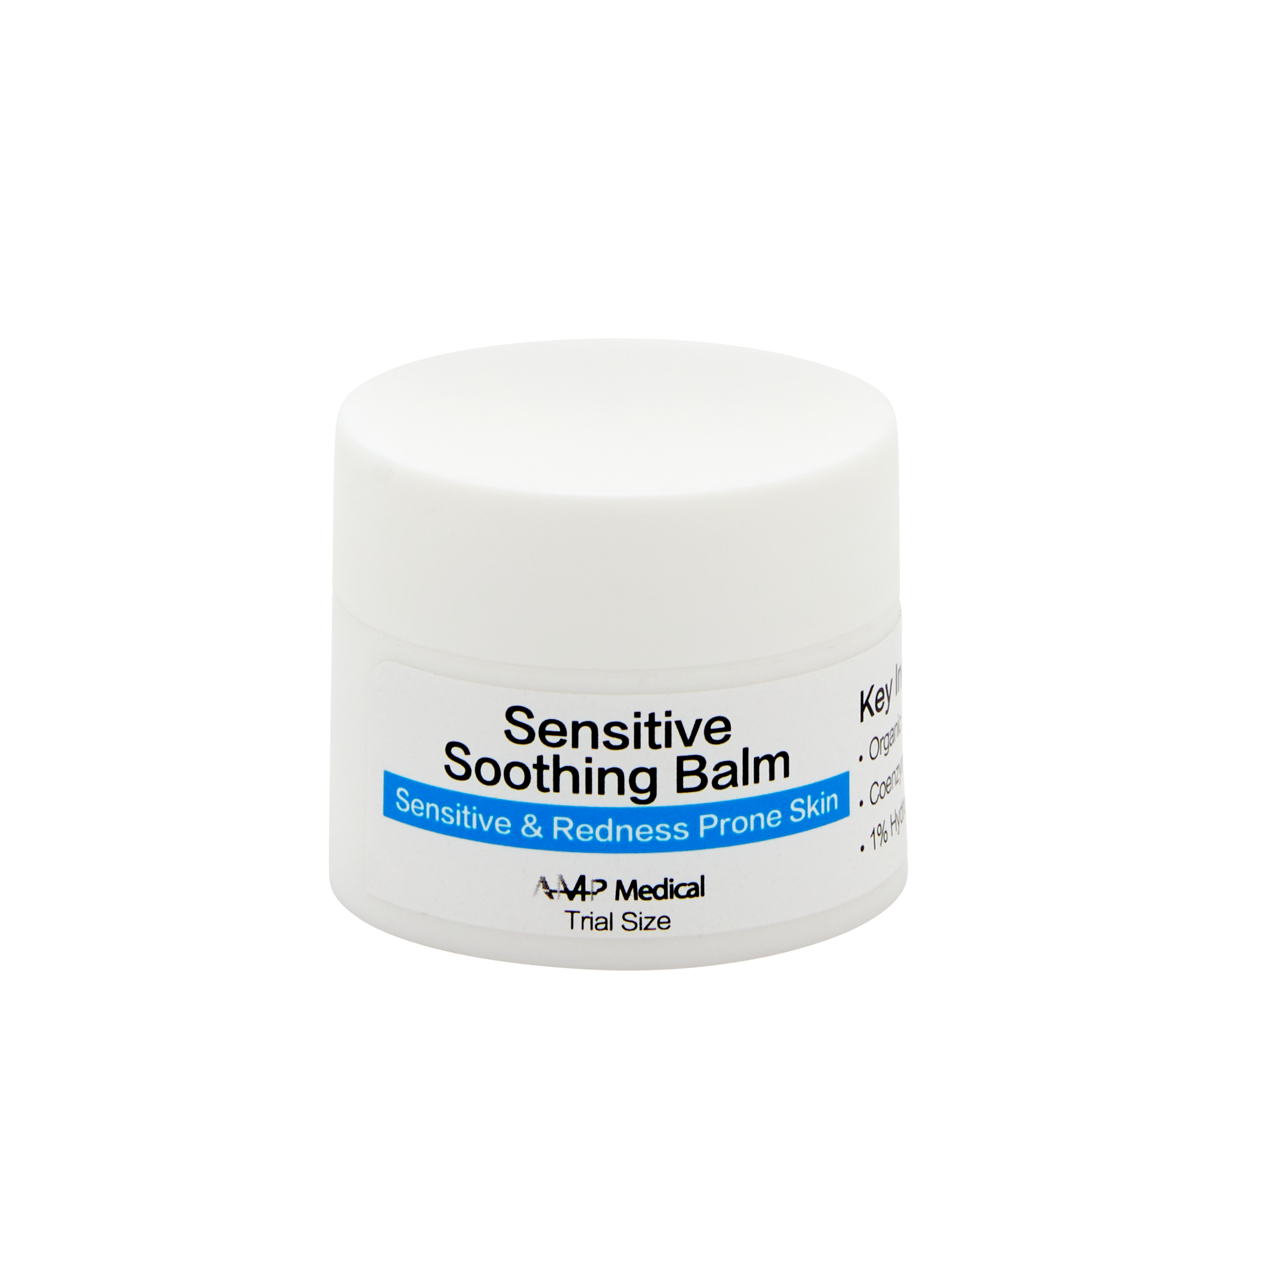 Includes Sensitive Soothing Balm